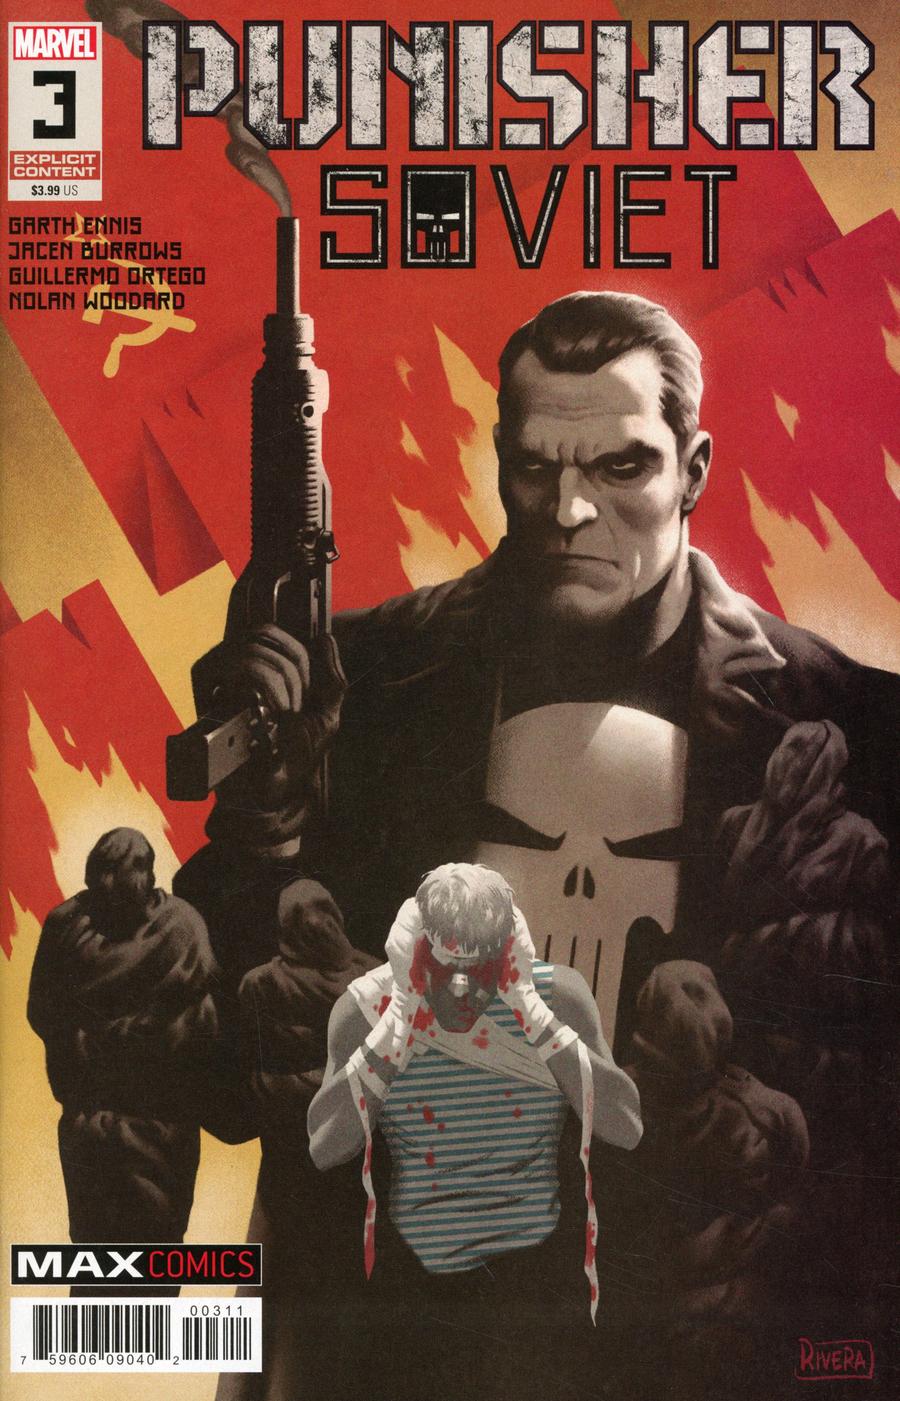 Punisher Soviet #3 Cover A Regular Paolo Rivera Cover